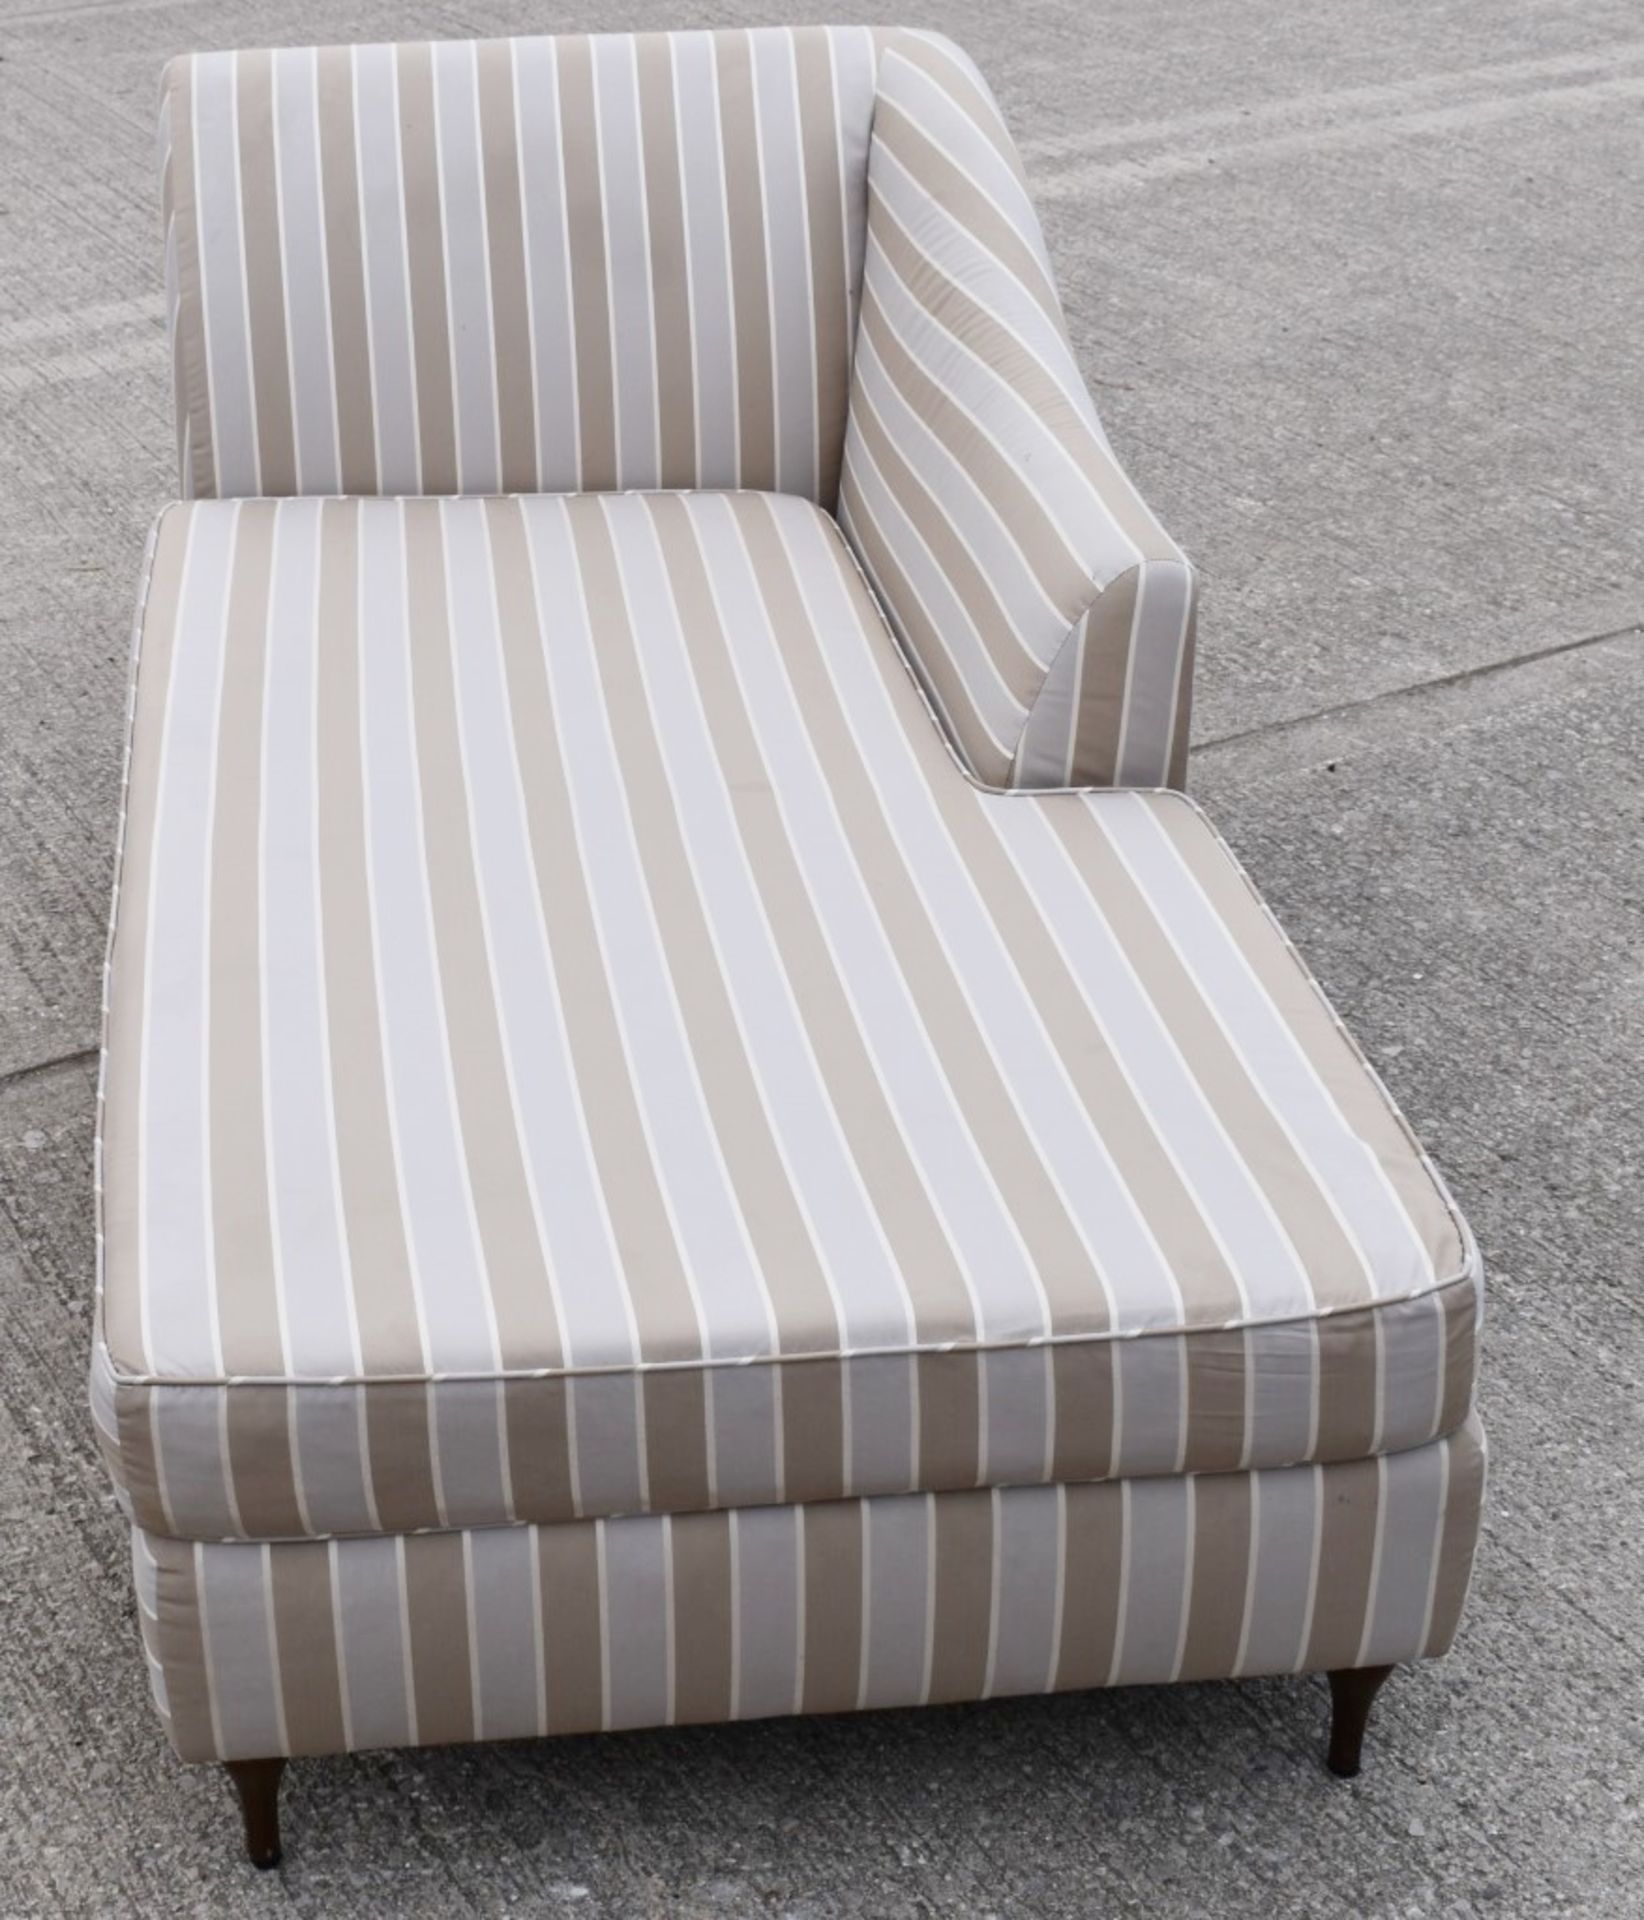 1 x Classically Styled Chaise Lounge Upholstered in a Premium Striped Fabric - Recently Procured - Image 3 of 3